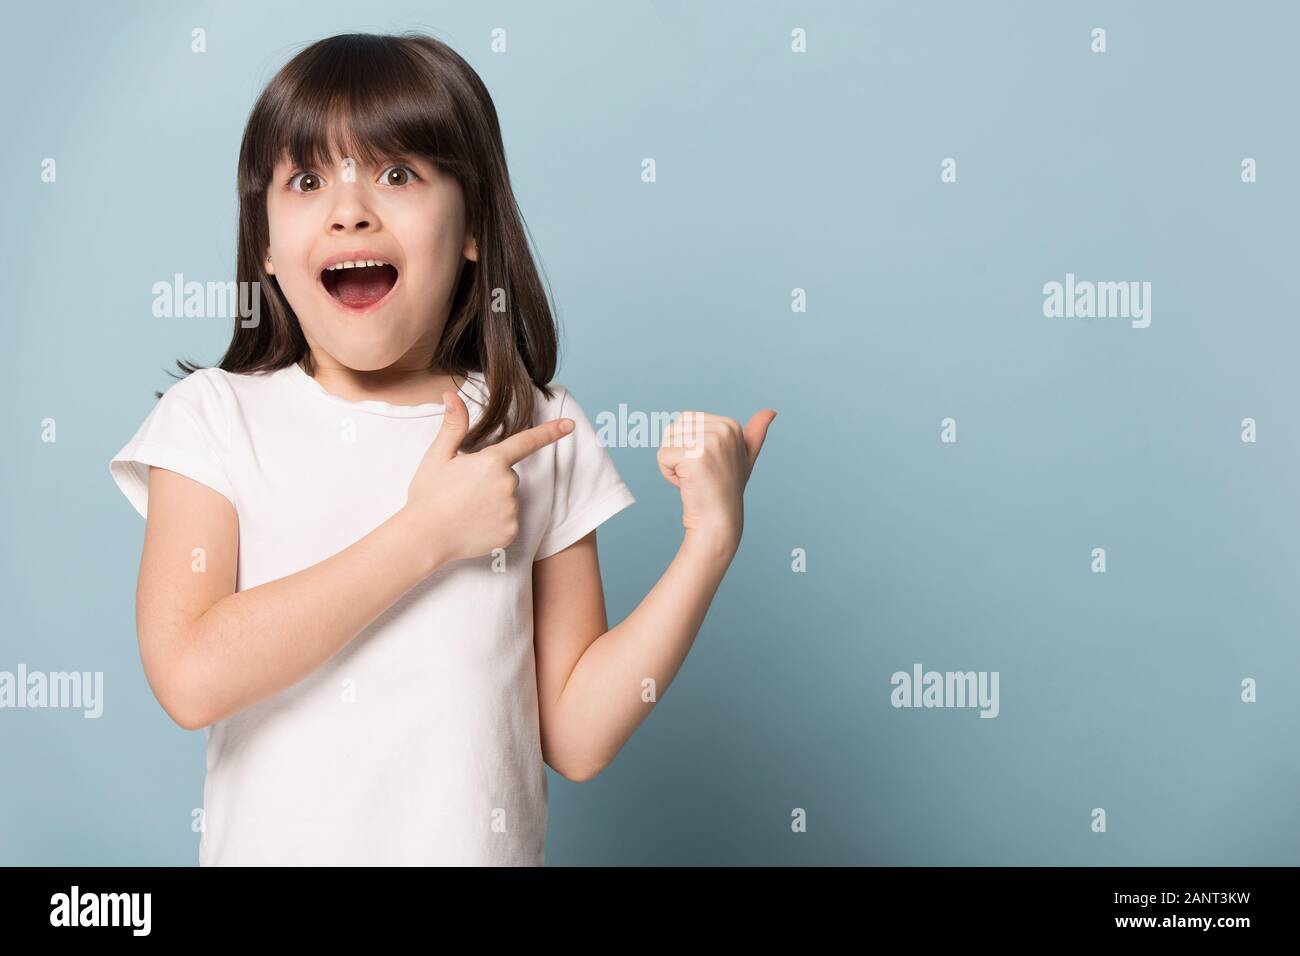 Excited gawp girl pointing back on empty copy space. Stock Photo